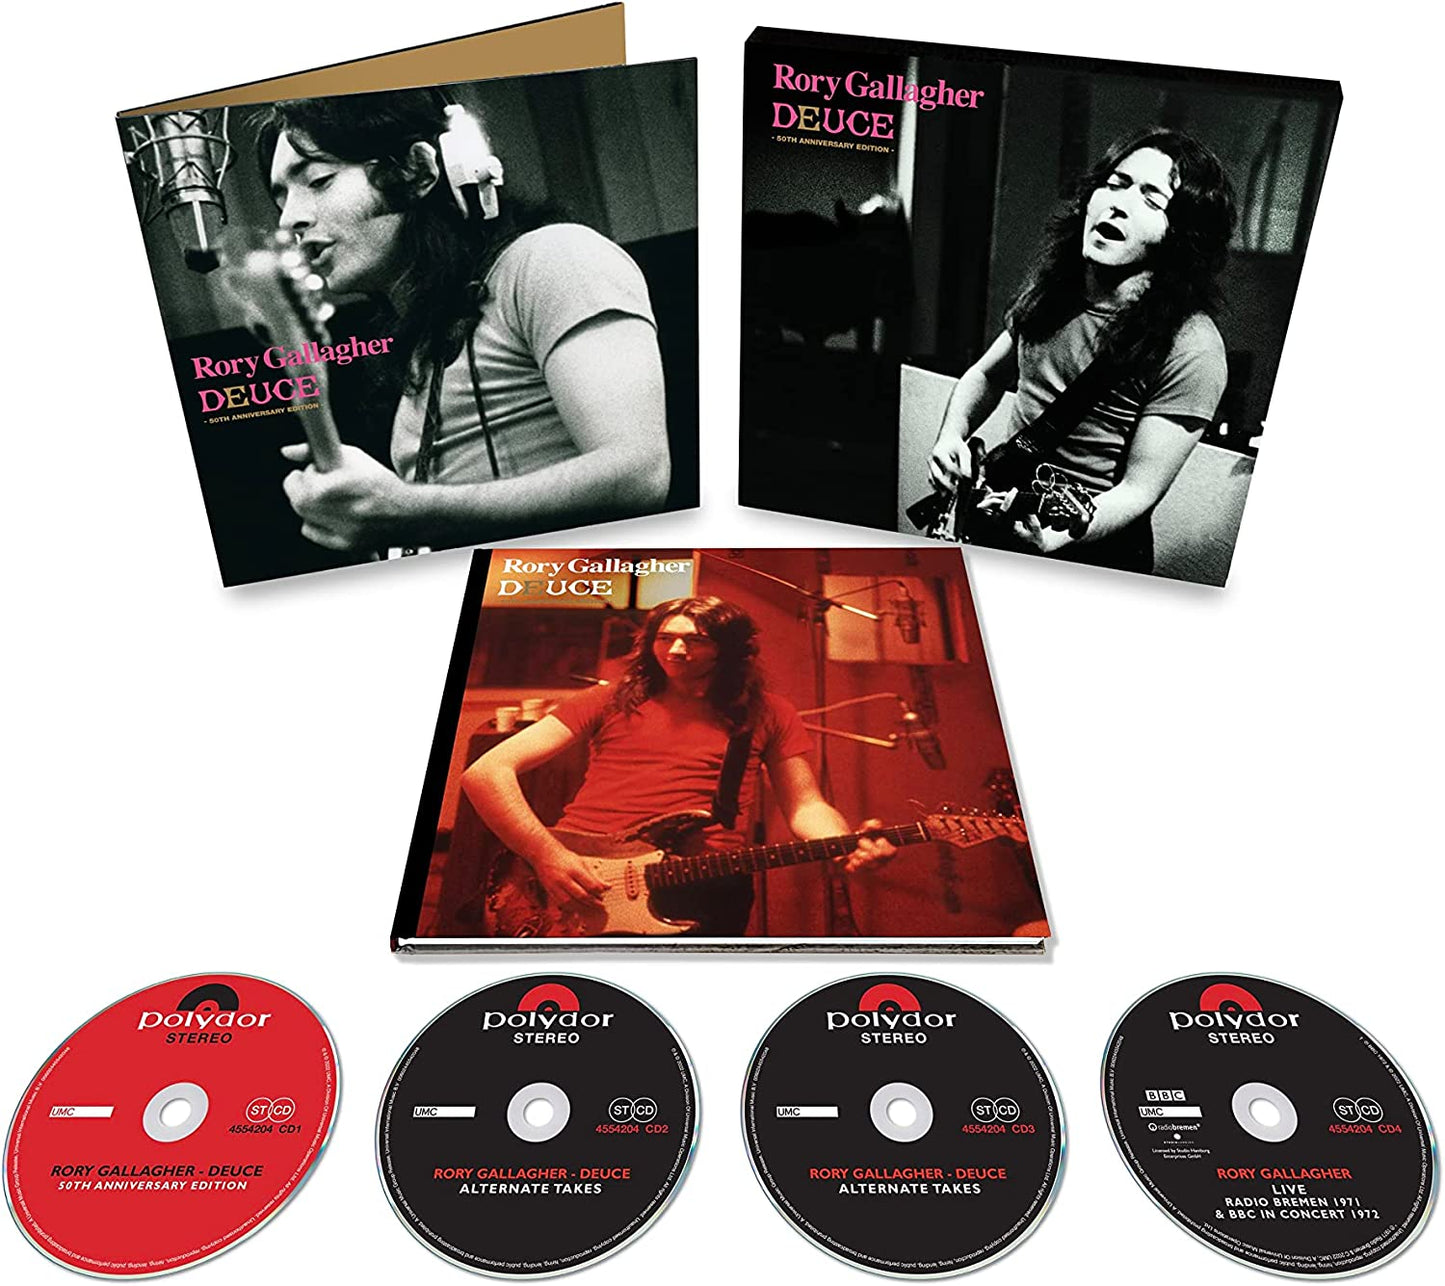 Rory Gallagher - Deuce (50th Anniversary Edition) - 4CD